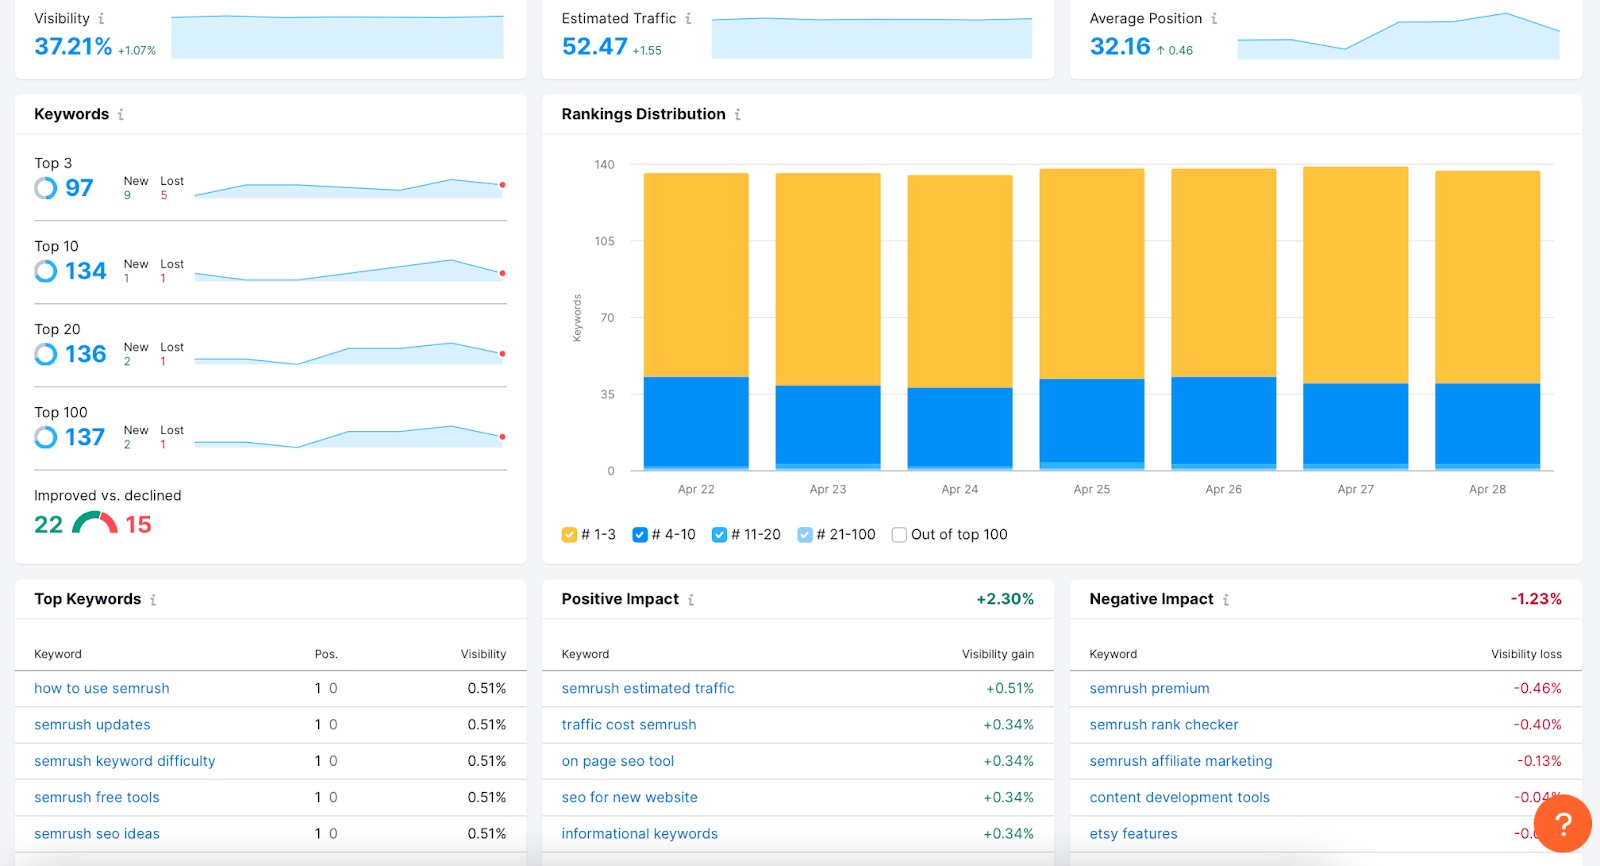 an example of a report in Semrush’s Position Tracking tool